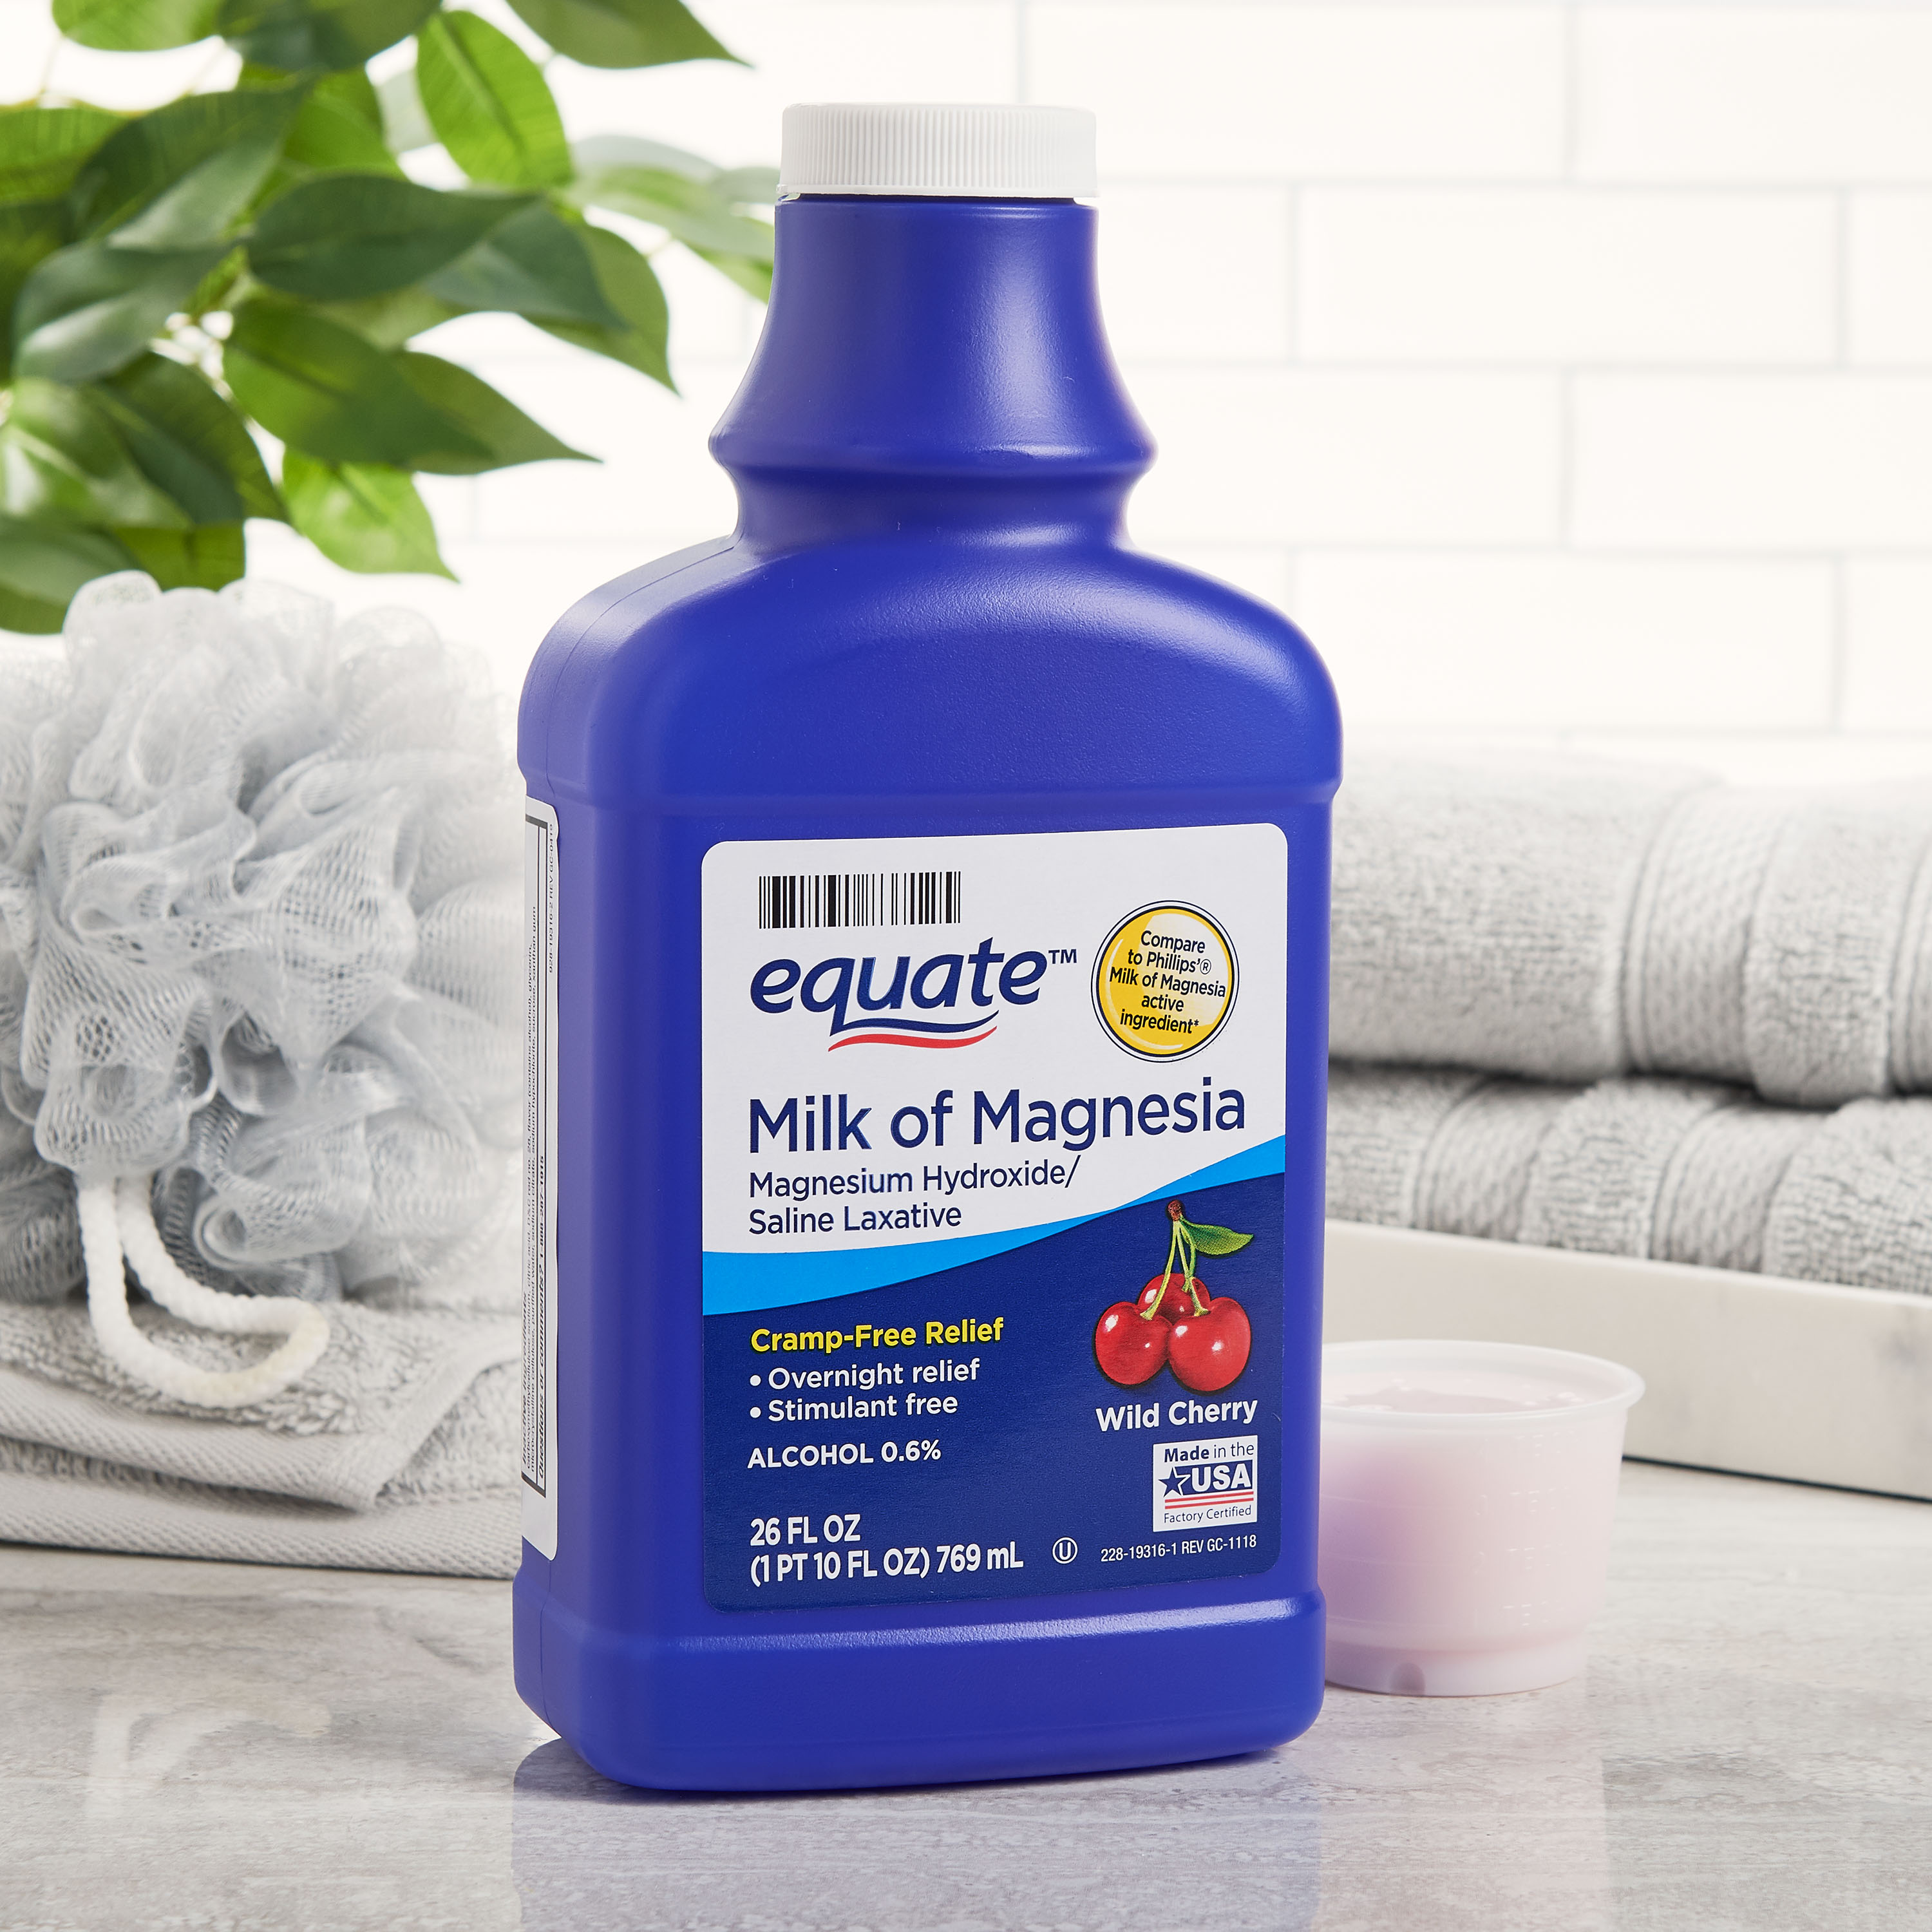 Equate Wild Cherry Milk of Magnesia, 26 fl. oz., over-the-counter, Laxative - image 5 of 9